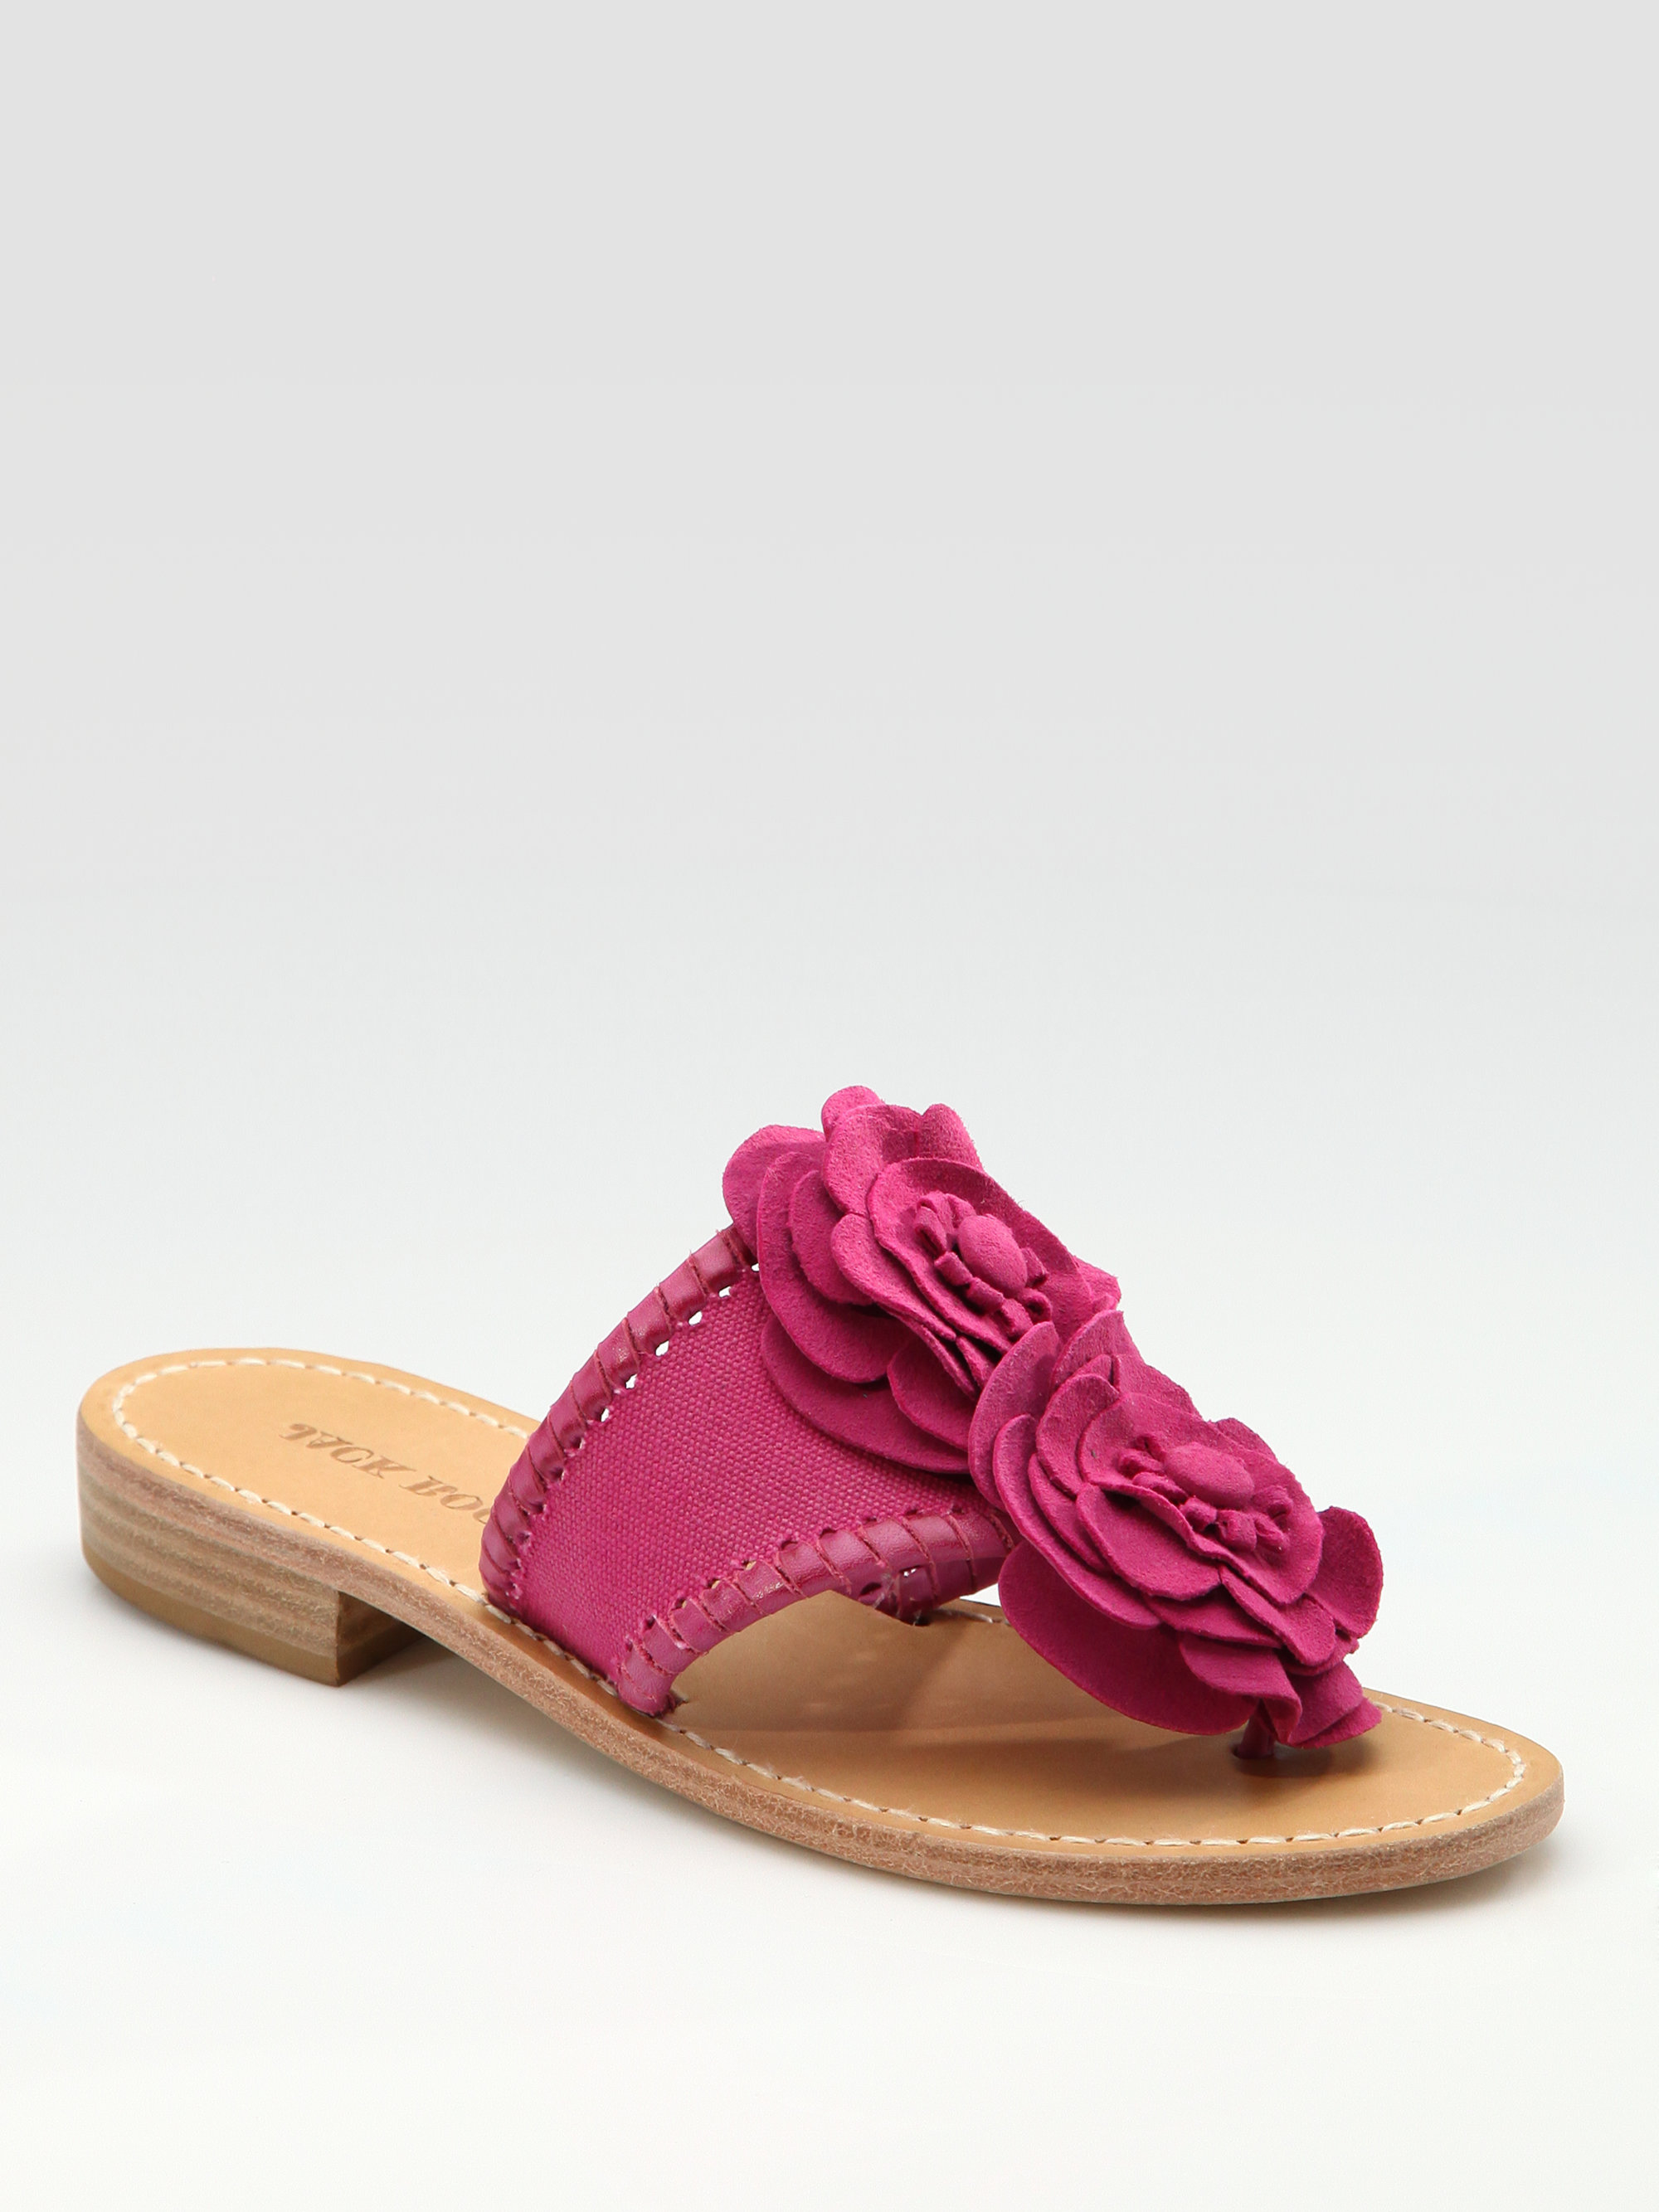 Lyst - Jack Rogers Madras Flower Sandals in Pink